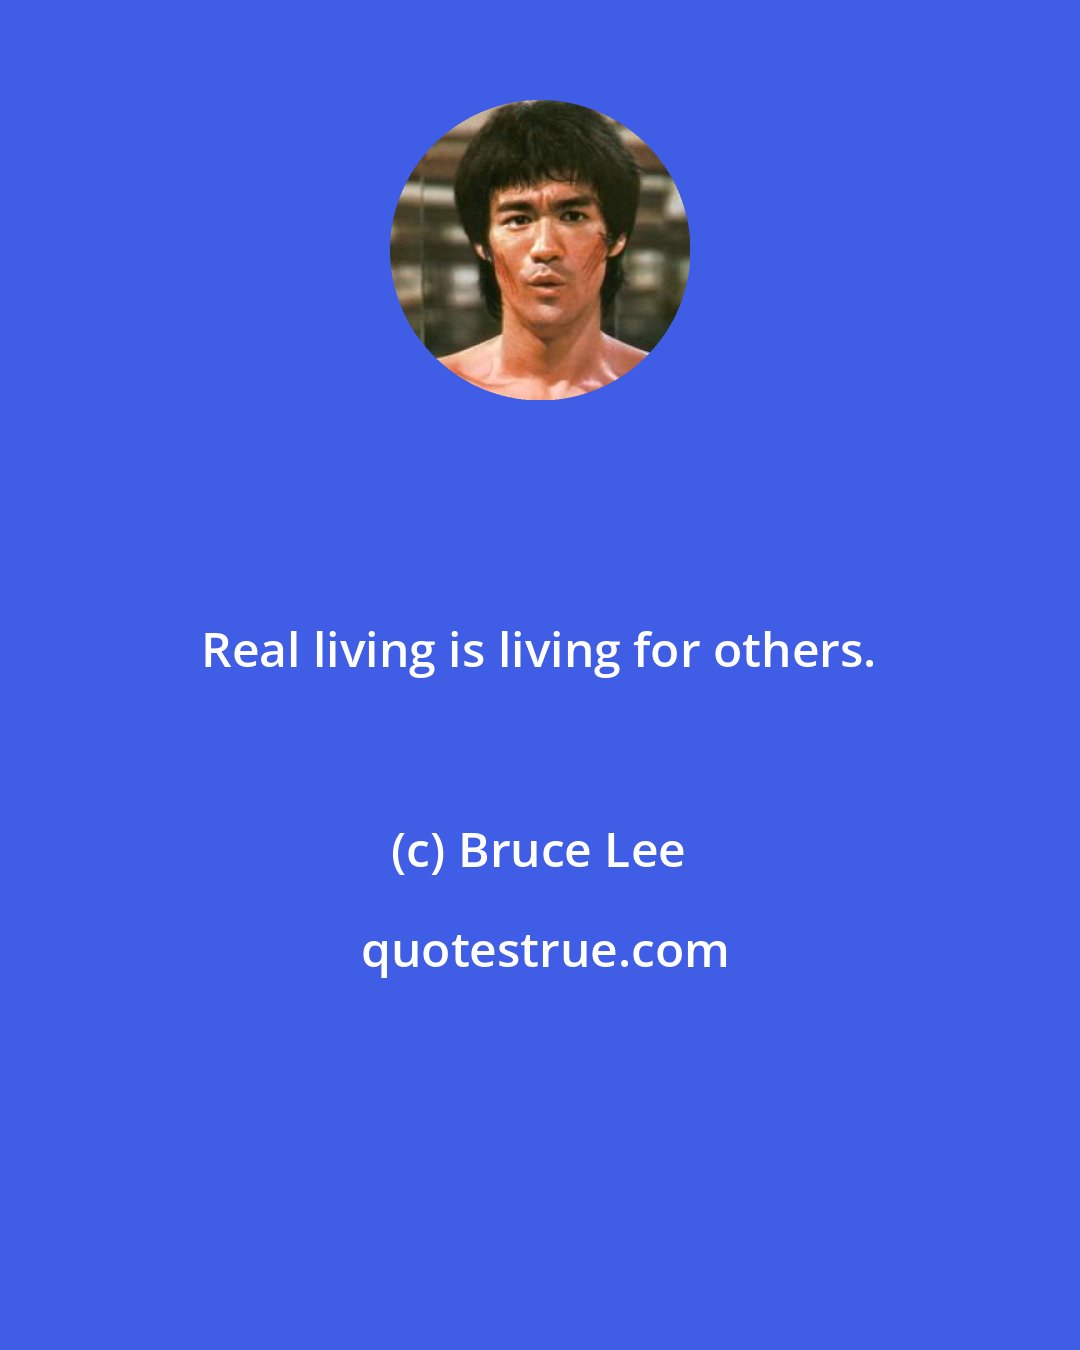 Bruce Lee: Real living is living for others.